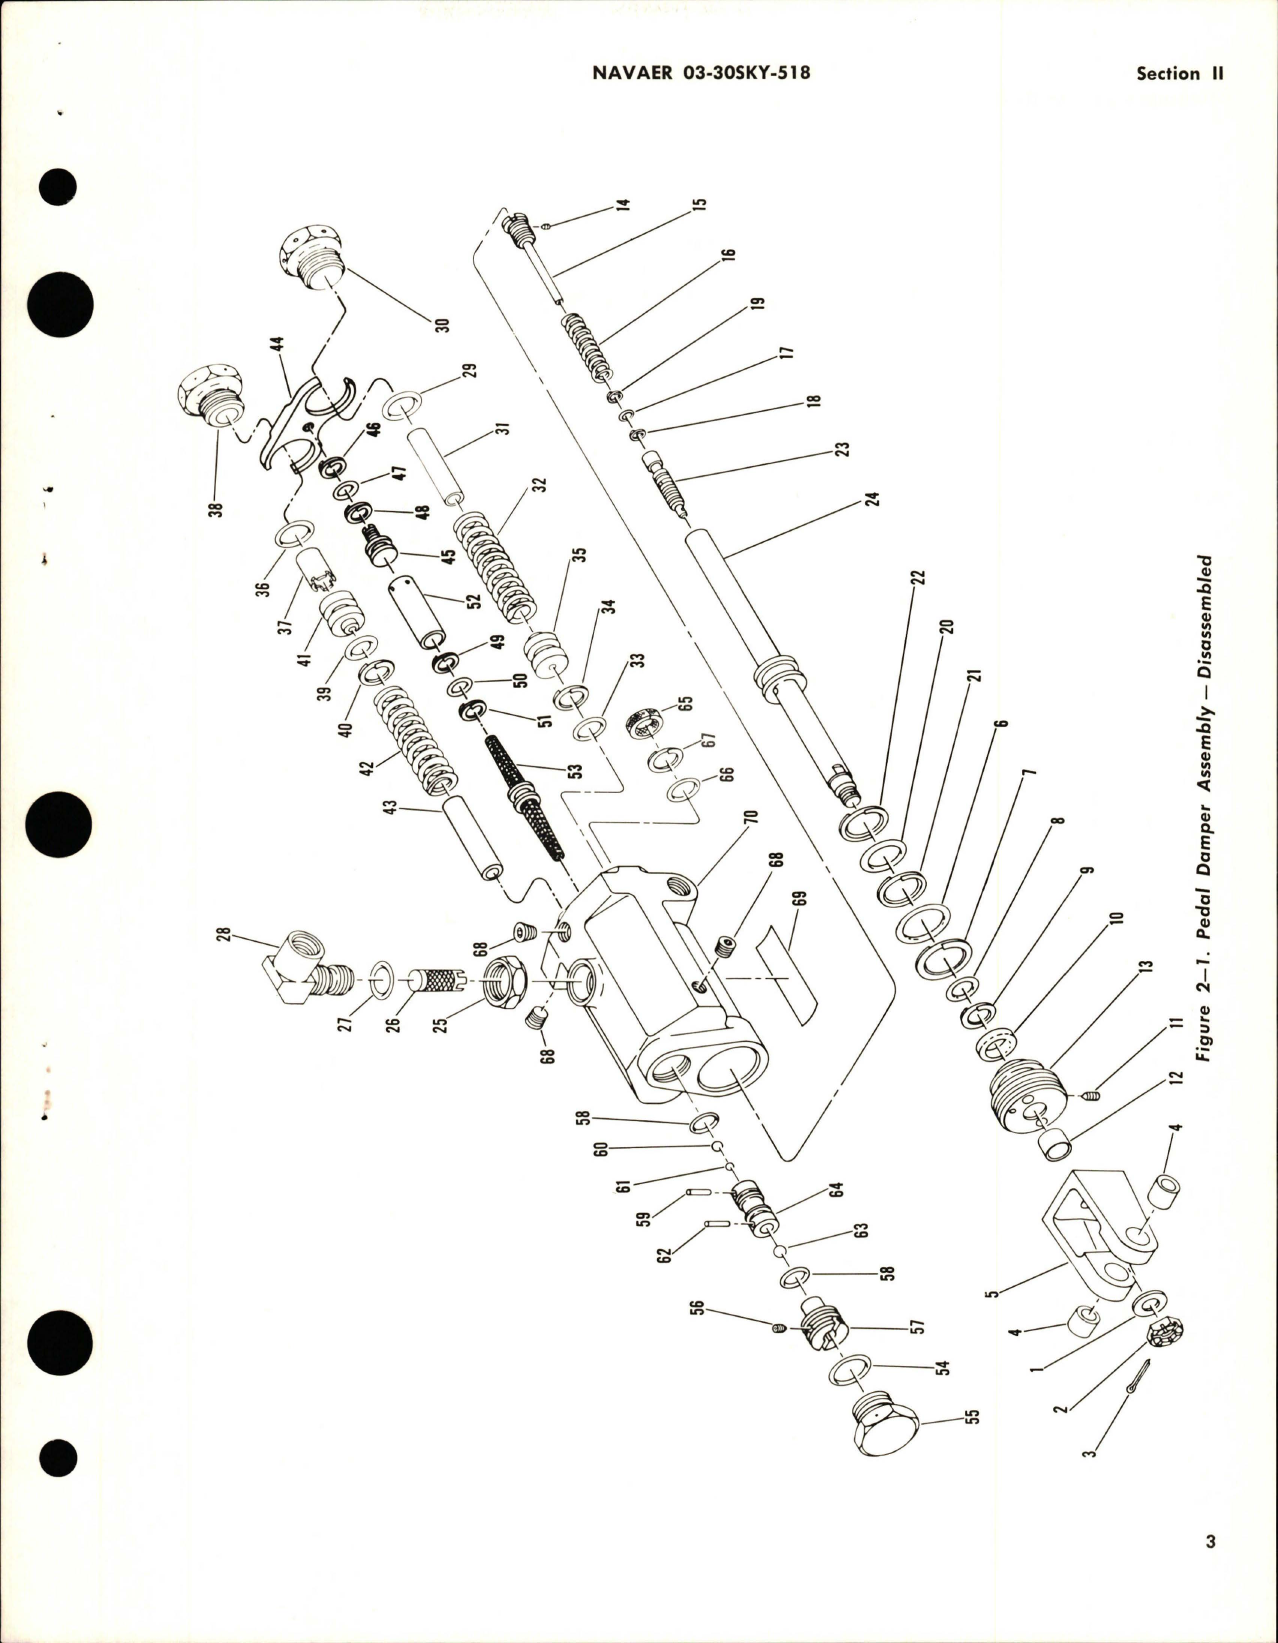 Sample page 5 from AirCorps Library document: Overhaul Instructions for Pedal Damper Assembly - Part S1565-61970 and S1565-61970-1